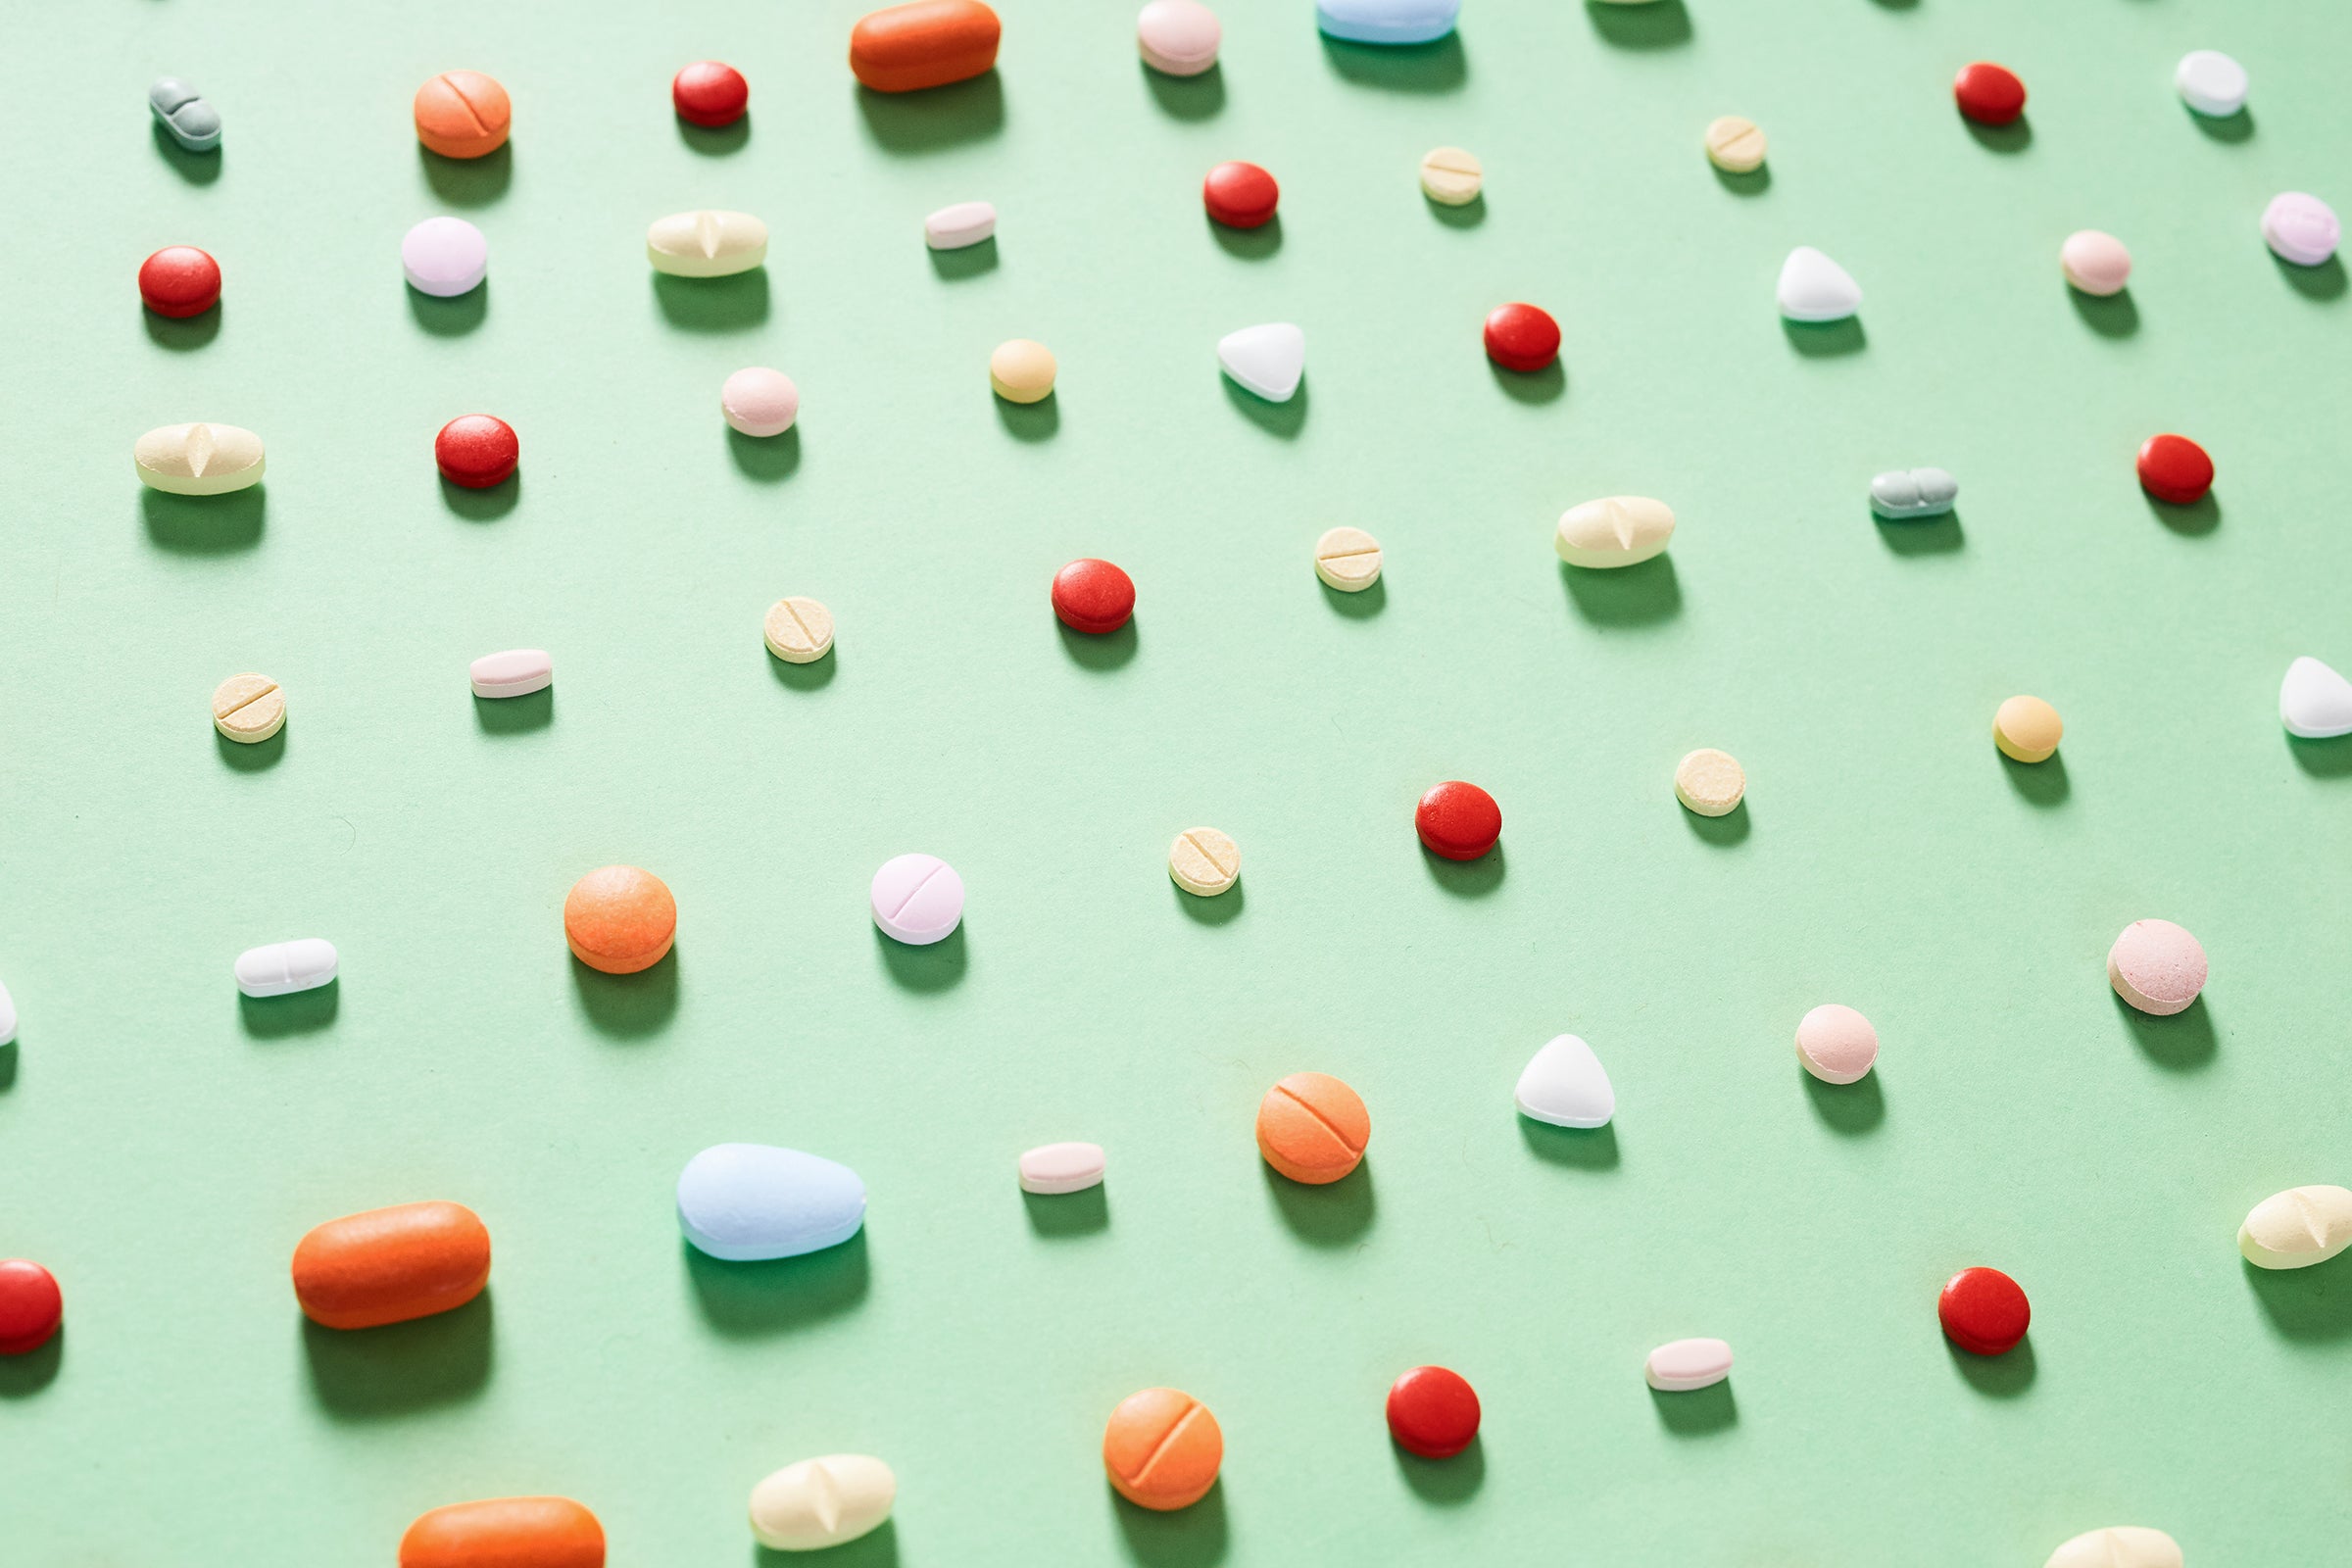 What's the Difference Between a Brand-Name Drug and a Generic Name Drug?